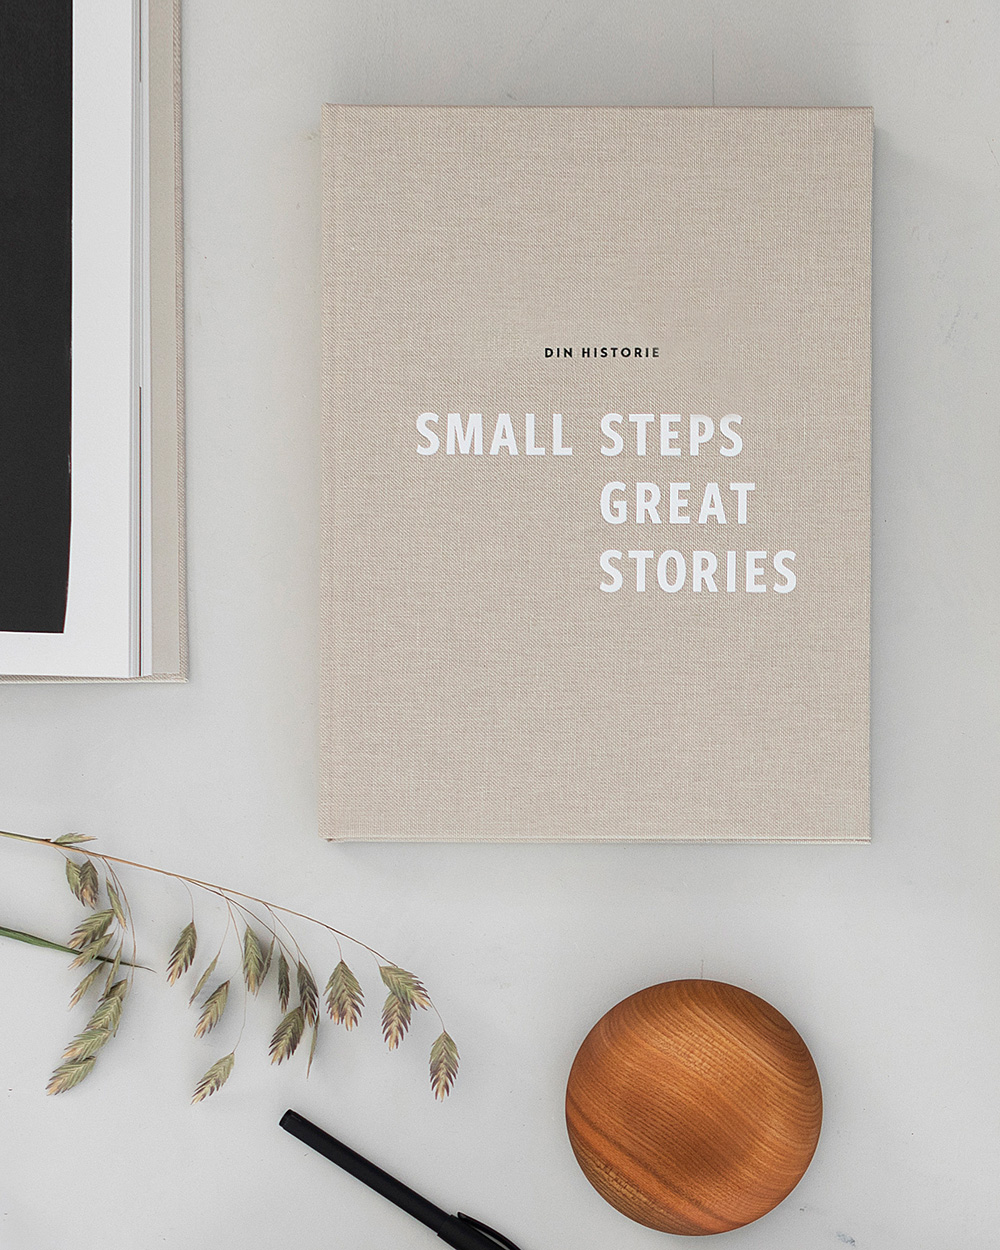 Small steps great stories book